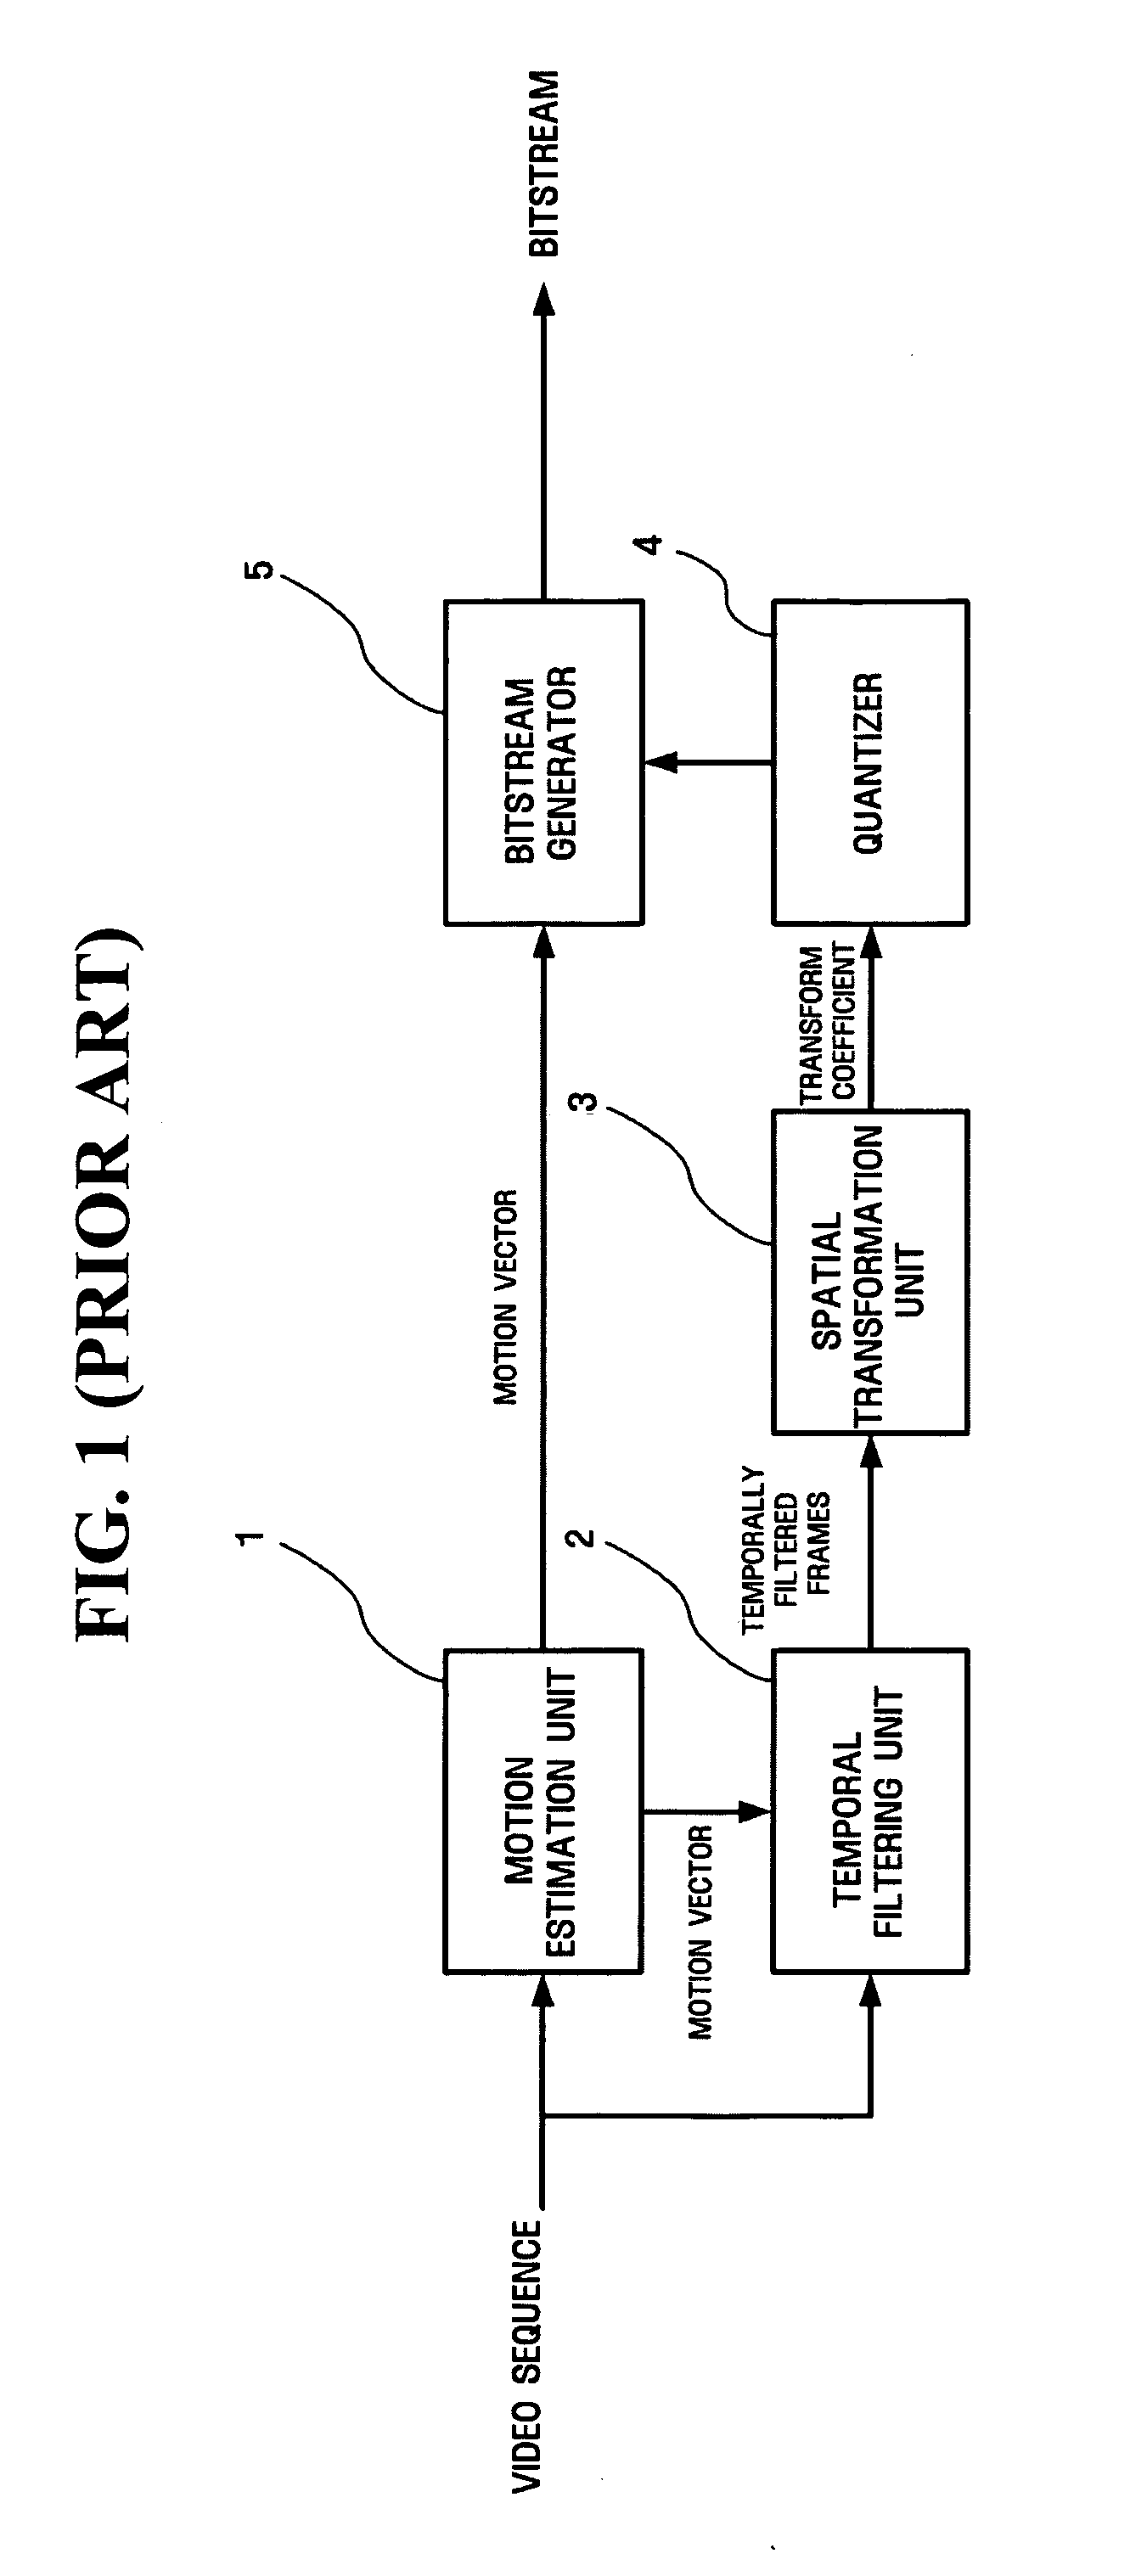 Apparatus and method for scalable video coding providing scalability in encoder part